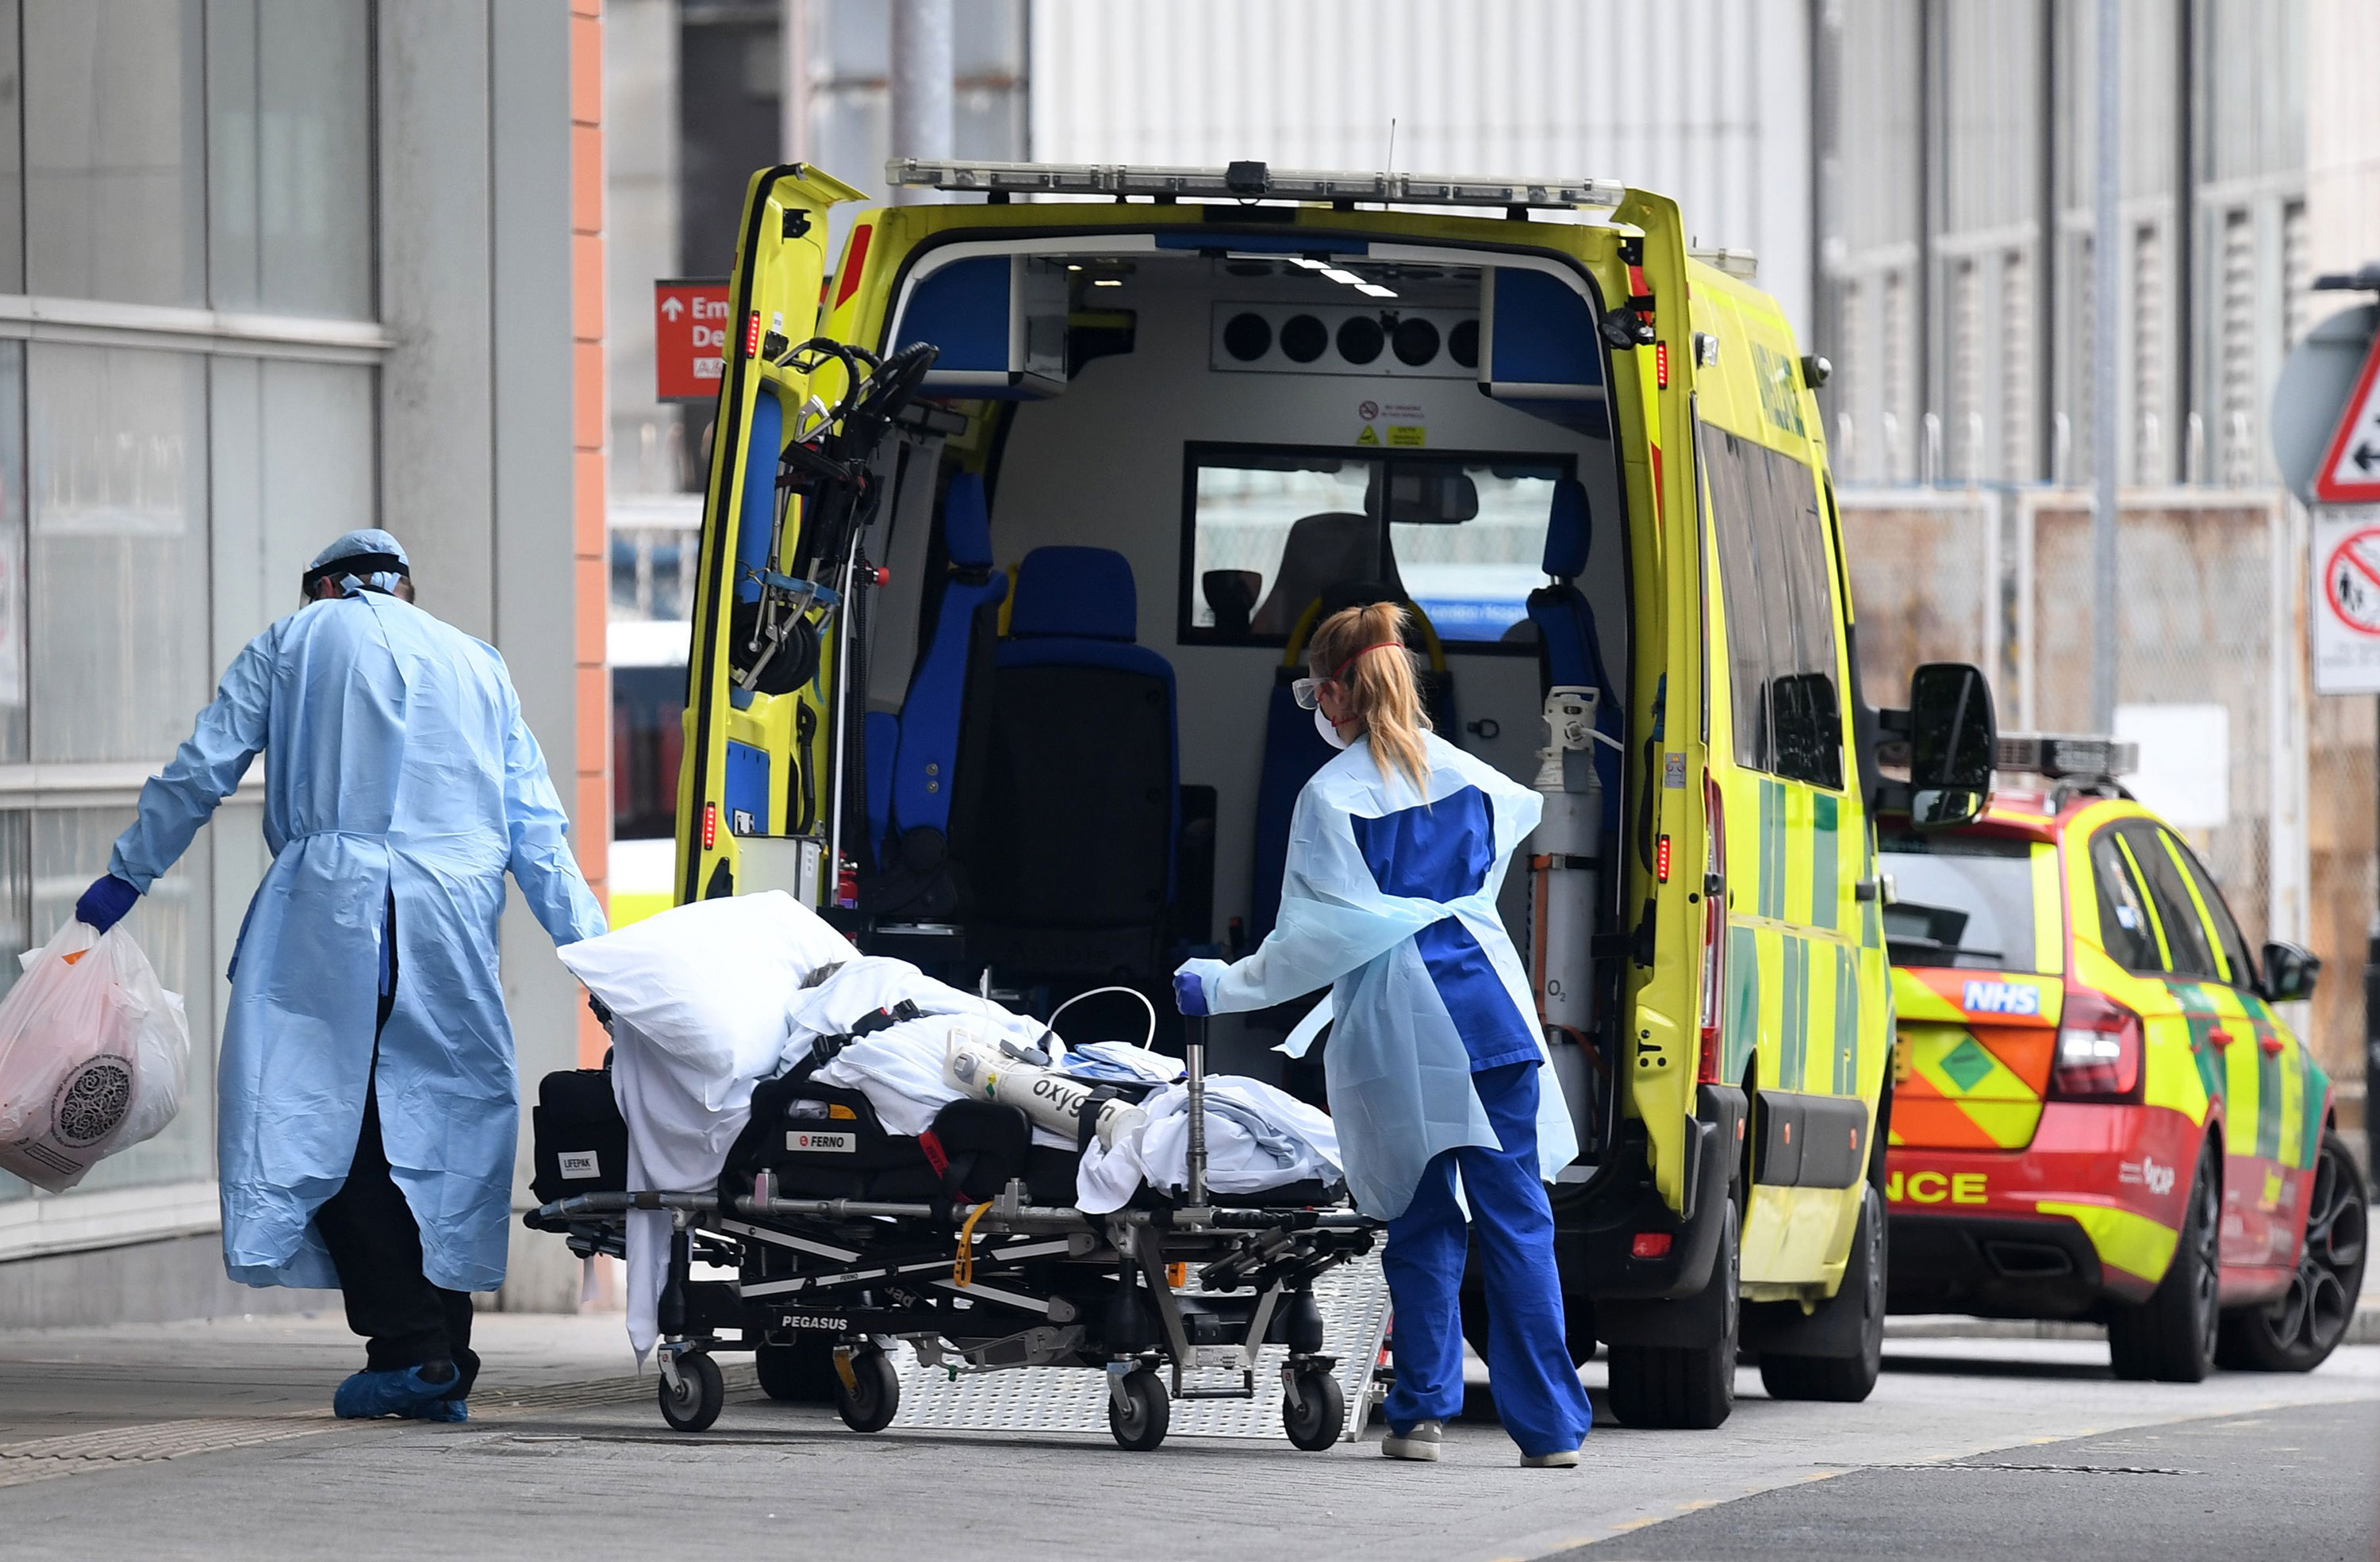 Health workers wear PPE as they transfer a patient from an ambulance into The Royal London Hospital in east London on April 18, 2020, during the novel coronavirus COVID-19 pandemic. - Britain's death toll from the coronavirus rose by 847 on Friday, health ministry figures showed, a slightly slower increase than the previous day but still among the worst rates globally. (Photo by DANIEL LEAL-OLIVAS / AFP) (Photo by DANIEL LEAL-OLIVAS/AFP via Getty Images)